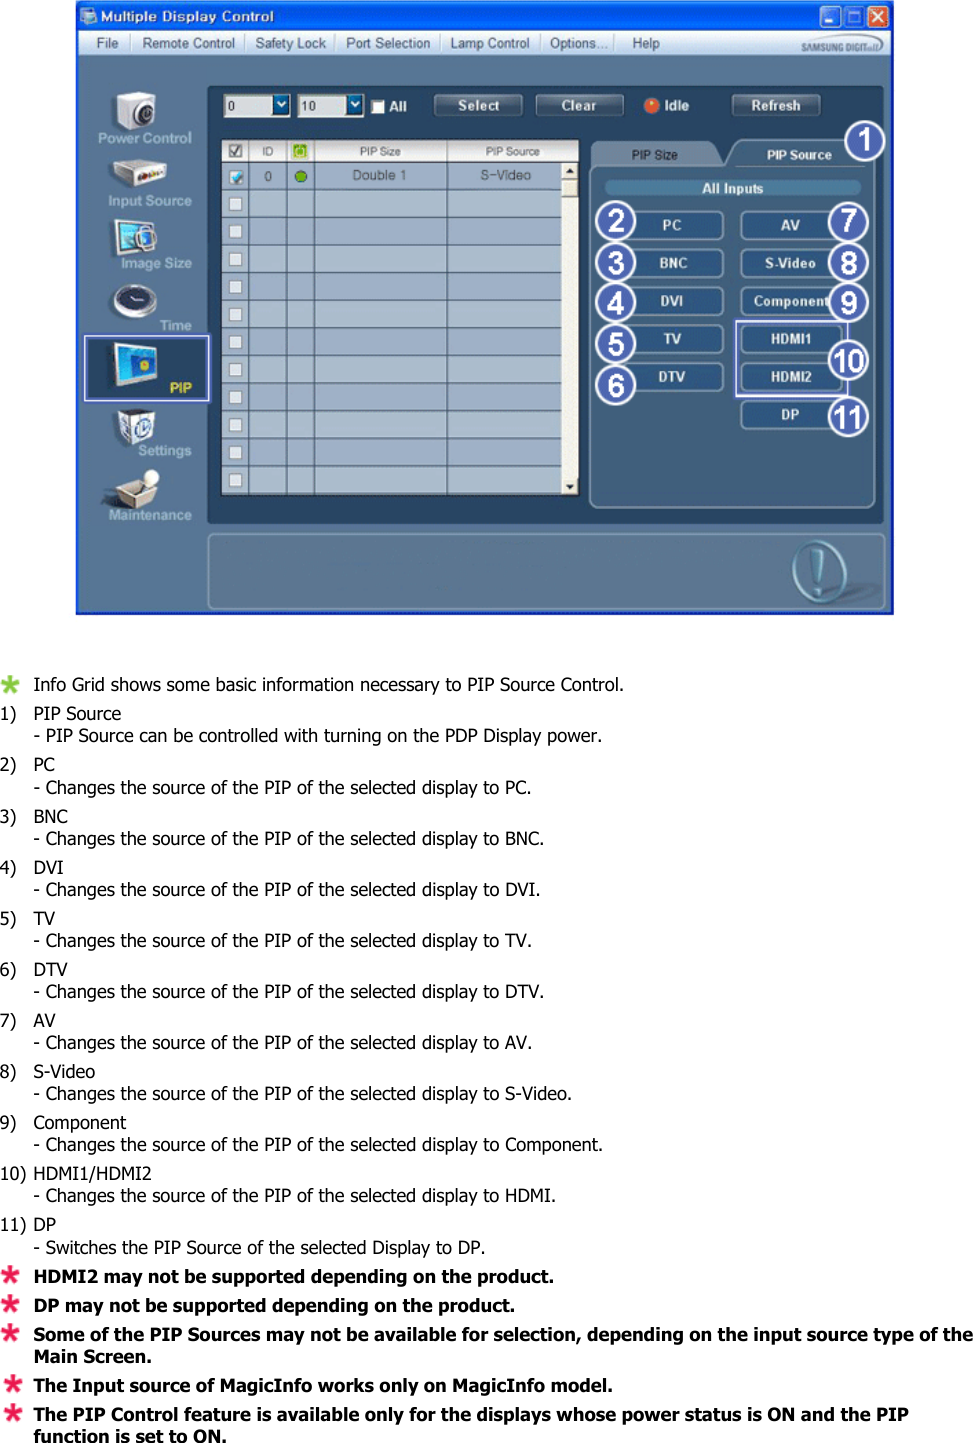  Info Grid shows some basic information necessary to PIP Source Control.1)  PIP Source  - PIP Source can be controlled with turning on the PDP Display power. 2) PC  - Changes the source of the PIP of the selected display to PC. 3) BNC  - Changes the source of the PIP of the selected display to BNC. 4) DVI  - Changes the source of the PIP of the selected display to DVI. 5) TV - Changes the source of the PIP of the selected display to TV. 6) DTV - Changes the source of the PIP of the selected display to DTV. 7) AV  - Changes the source of the PIP of the selected display to AV. 8) S-Video  - Changes the source of the PIP of the selected display to S-Video. 9) Component  - Changes the source of the PIP of the selected display to Component. 10) HDMI1/HDMI2 - Changes the source of the PIP of the selected display to HDMI. 11) DP - Switches the PIP Source of the selected Display to DP.HDMI2 may not be supported depending on the product. DP may not be supported depending on the product. Some of the PIP Sources may not be available for selection, depending on the input source type of the Main Screen.The Input source of MagicInfo works only on MagicInfo model. The PIP Control feature is available only for the displays whose power status is ON and the PIP function is set to ON.